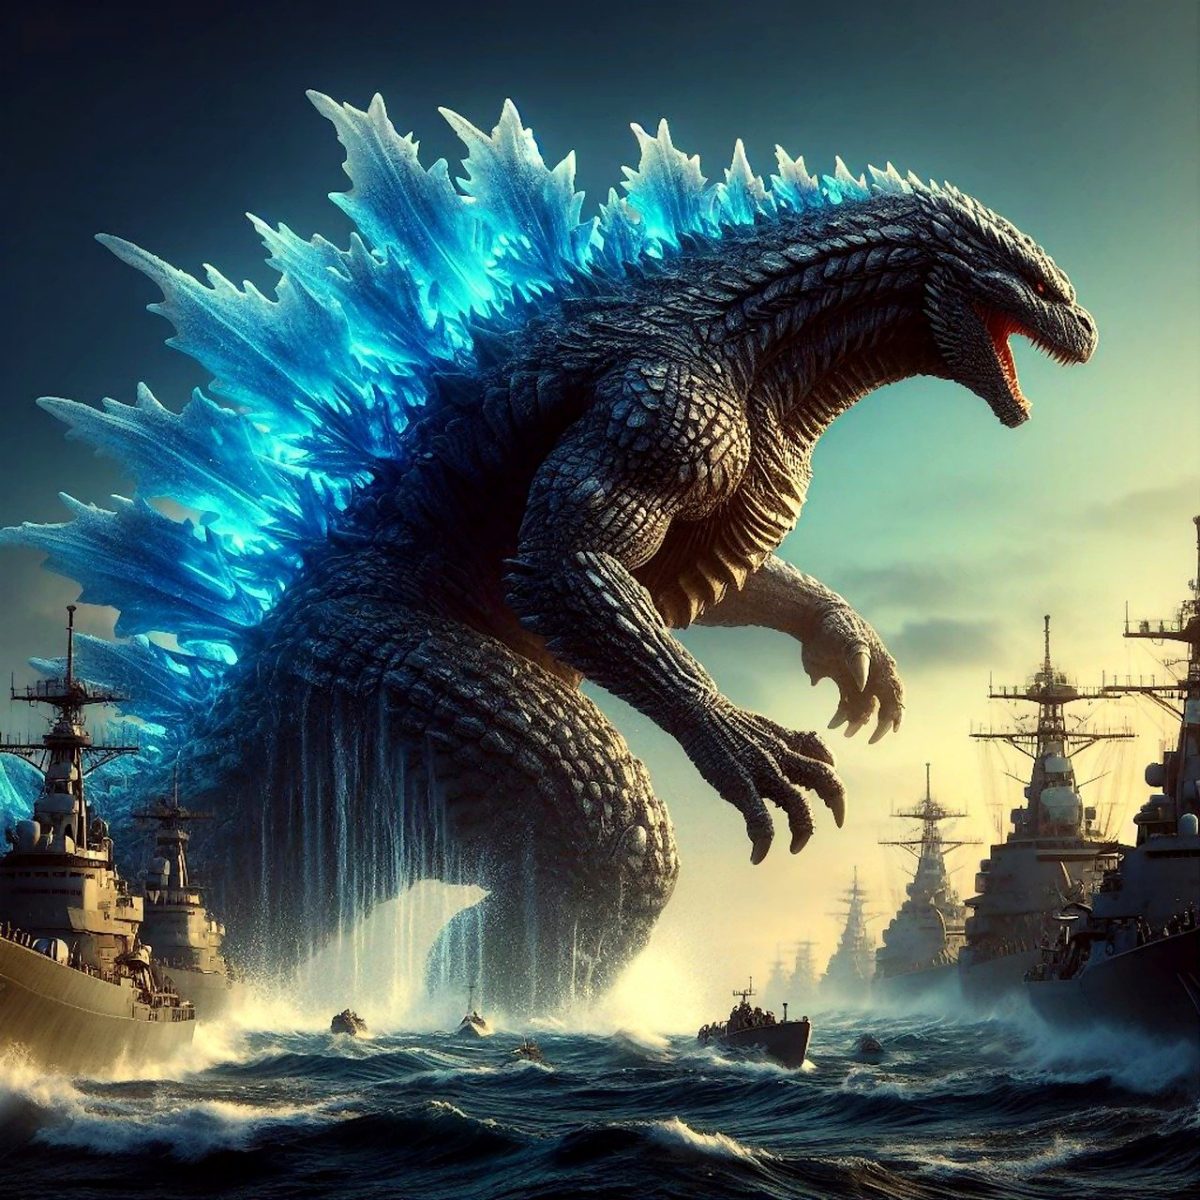 Godzilla+attacks+Japans+navy.+The+destruction+he+causes+comes+right+after+WW2.